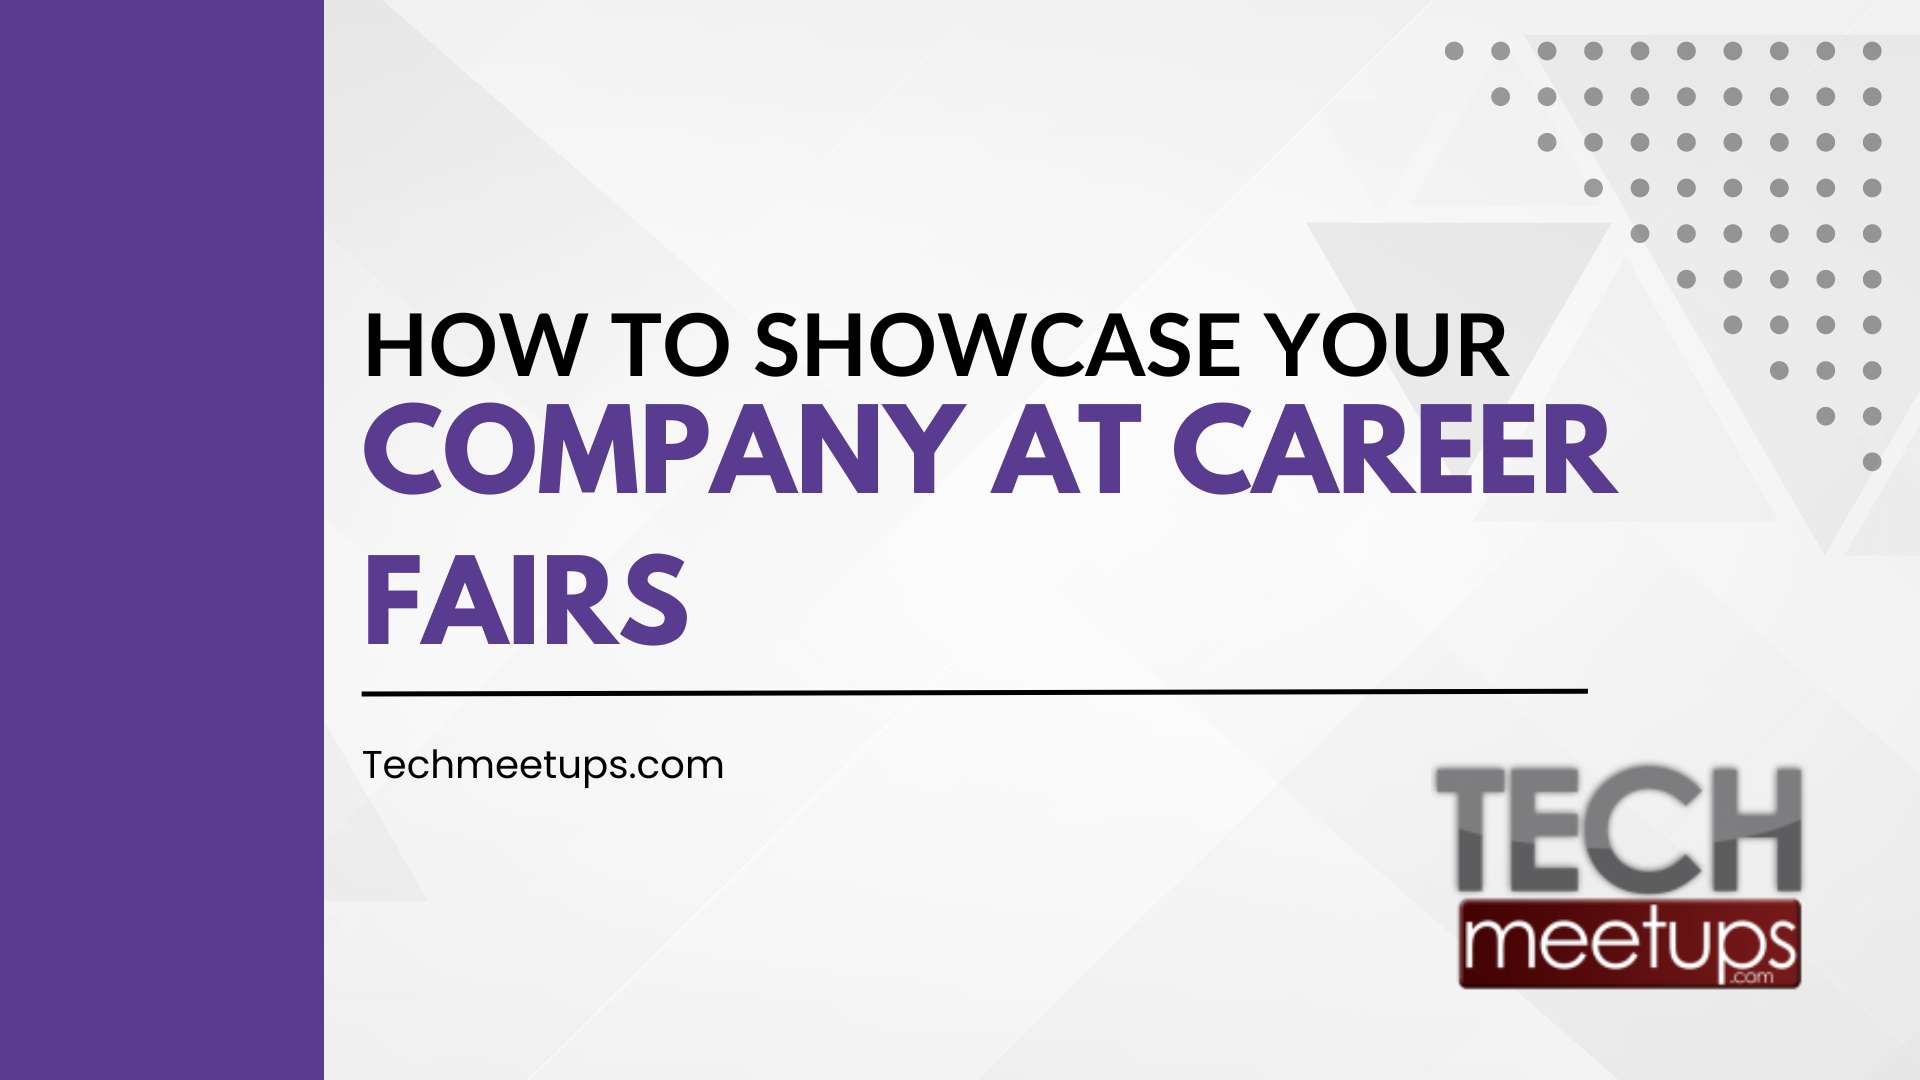 How to Showcase your Company at Career Fairs